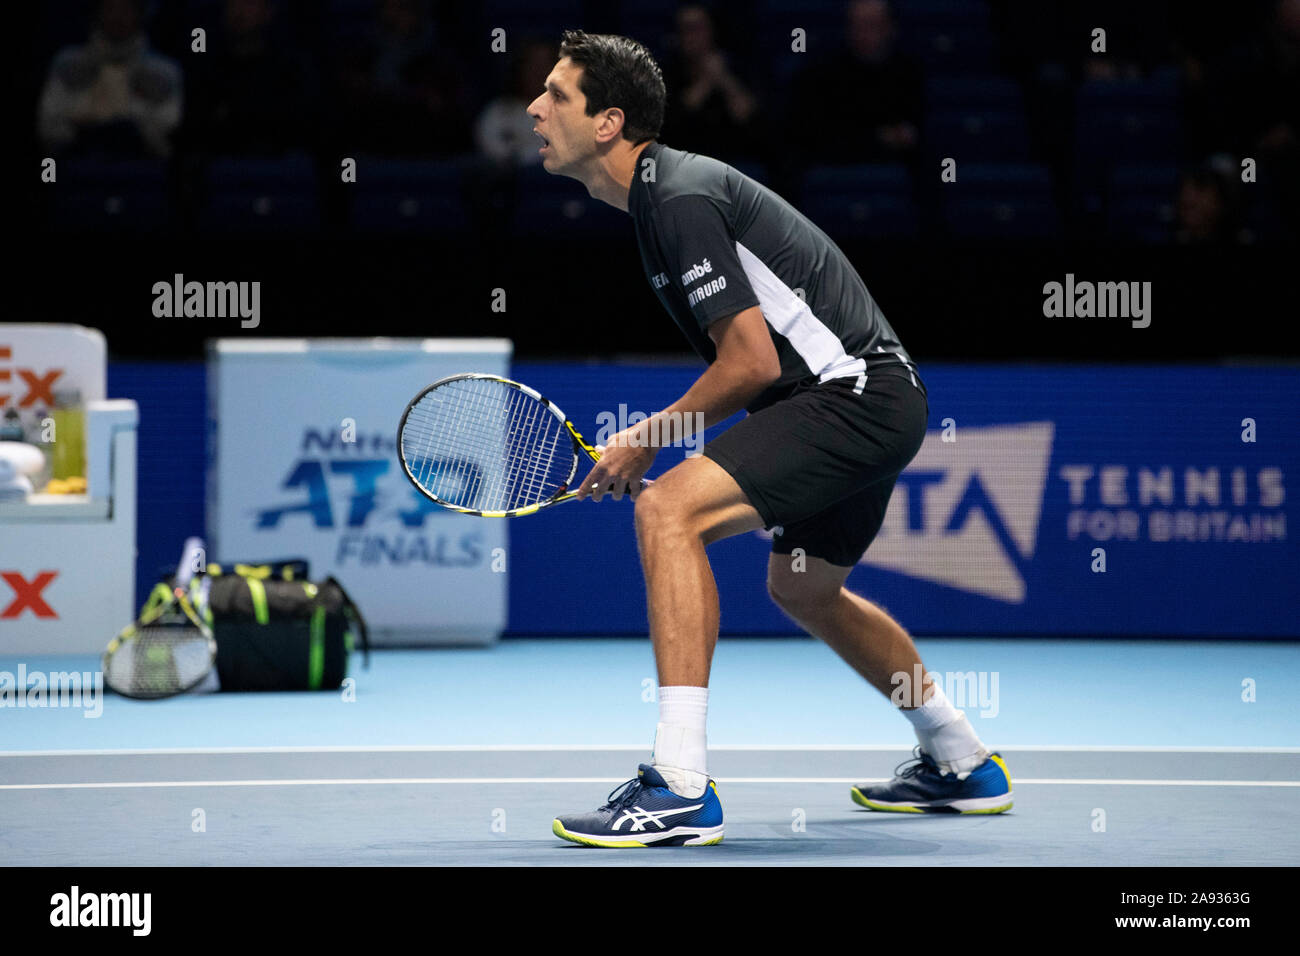 Londres, Inglaterra. 12th Nov, 2019. Brazilian tennis player Marcelo Melo  during the (doubles) match between Melo and Kubot against Venus and Klaasen  at the O2 Arena in East London, England. The game